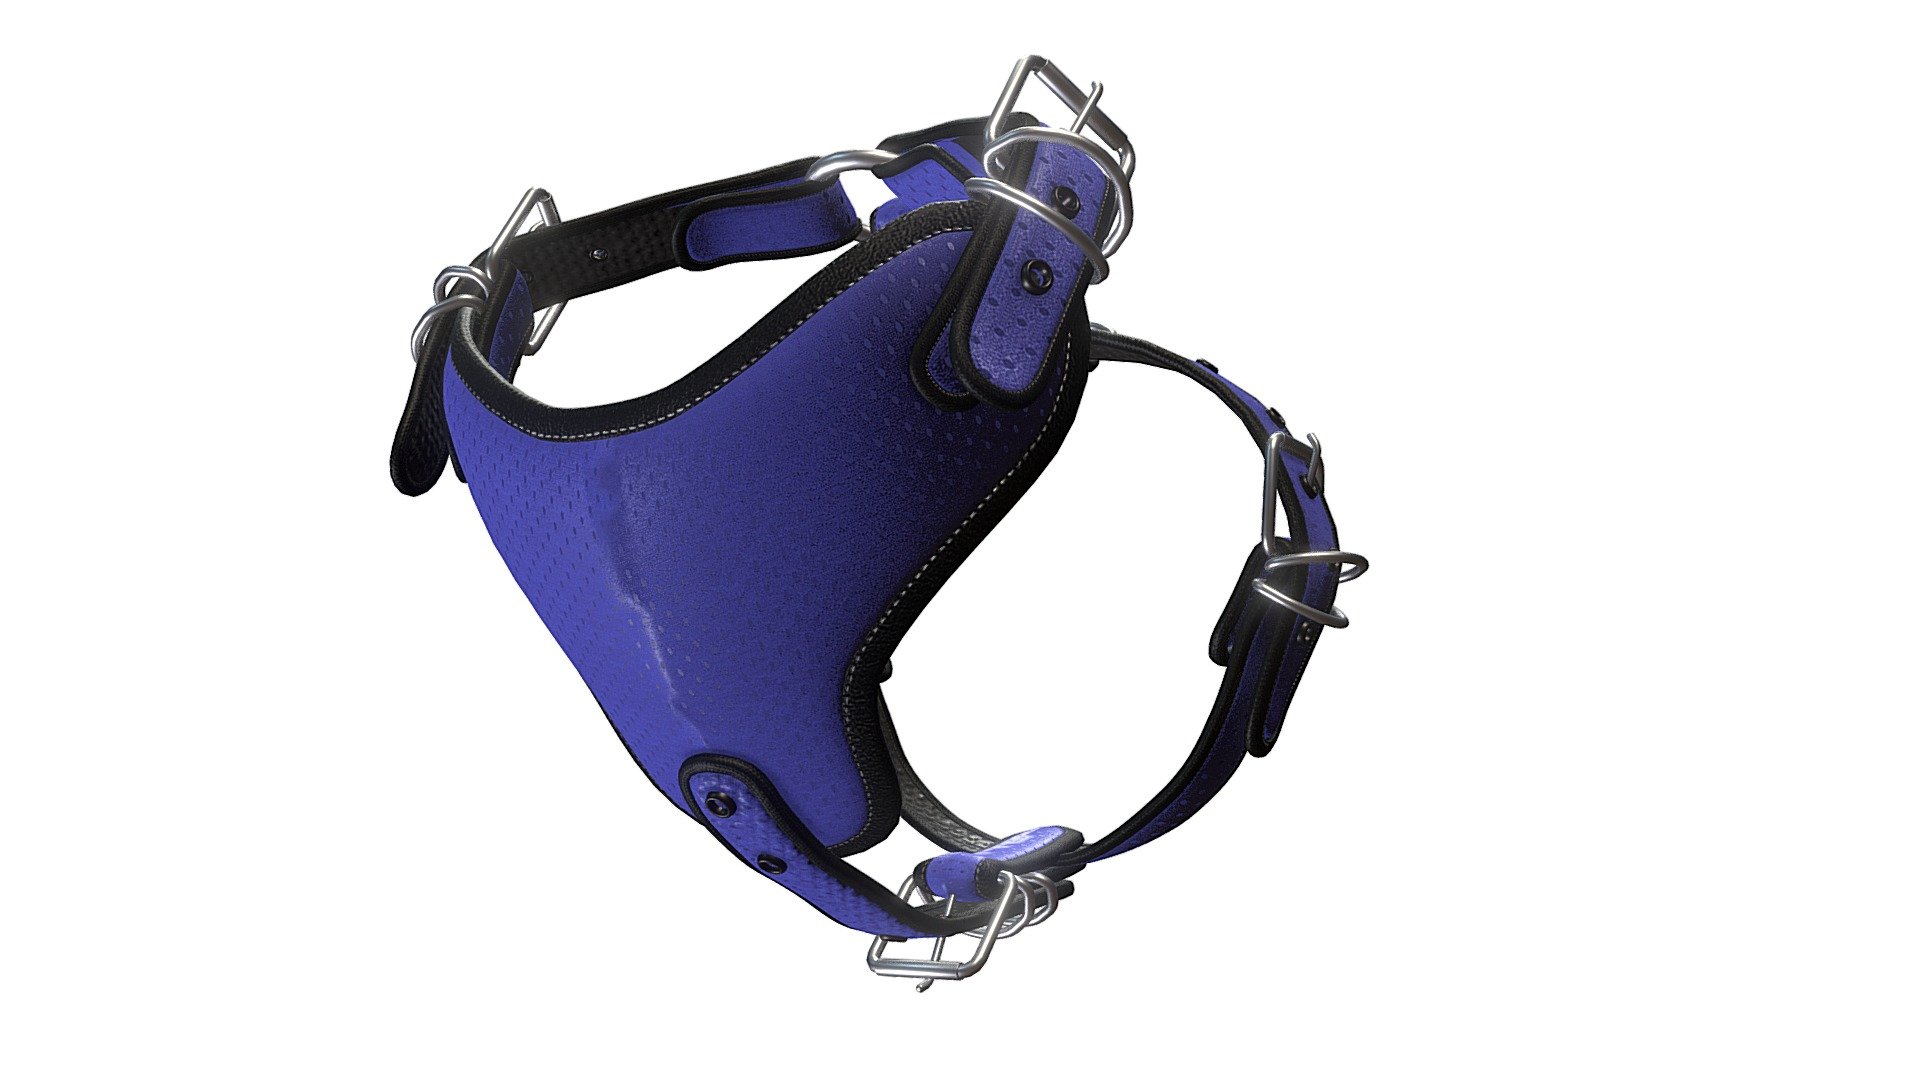 Dog Chest Harness Product for digital store viewer.

Main volumes made in Zbrush, extra elements, UV maping and texture done in Blender and PS 3d model